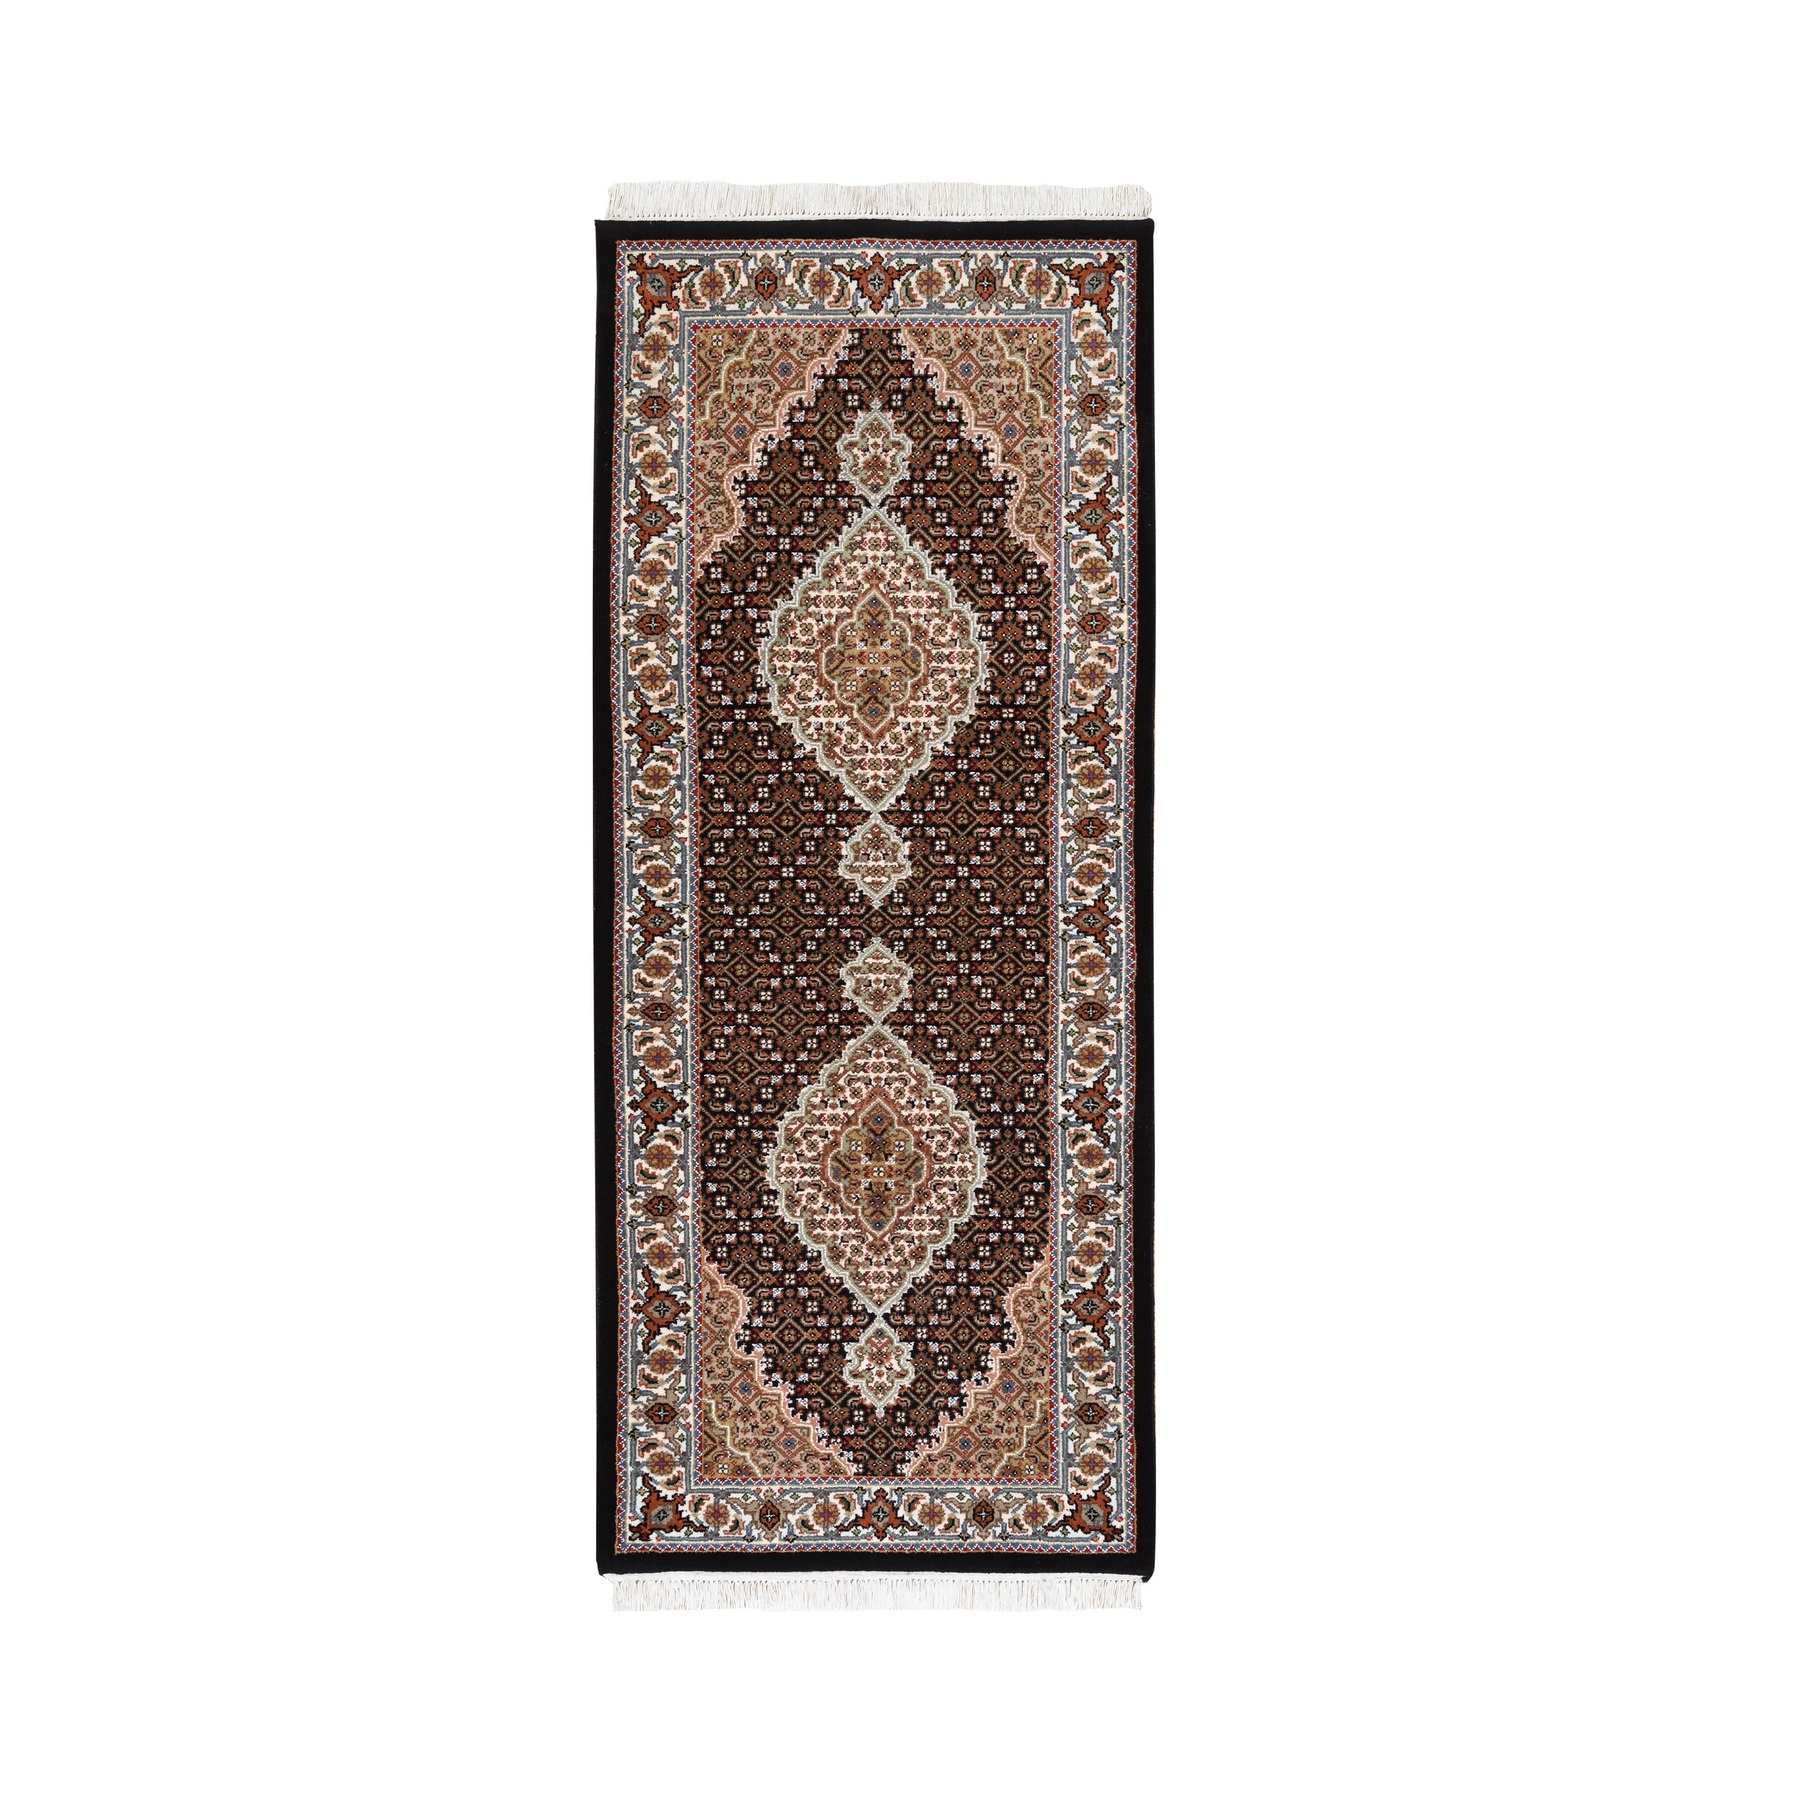 Pirniakan Collection Hand Knotted Black Rug No: 1124960